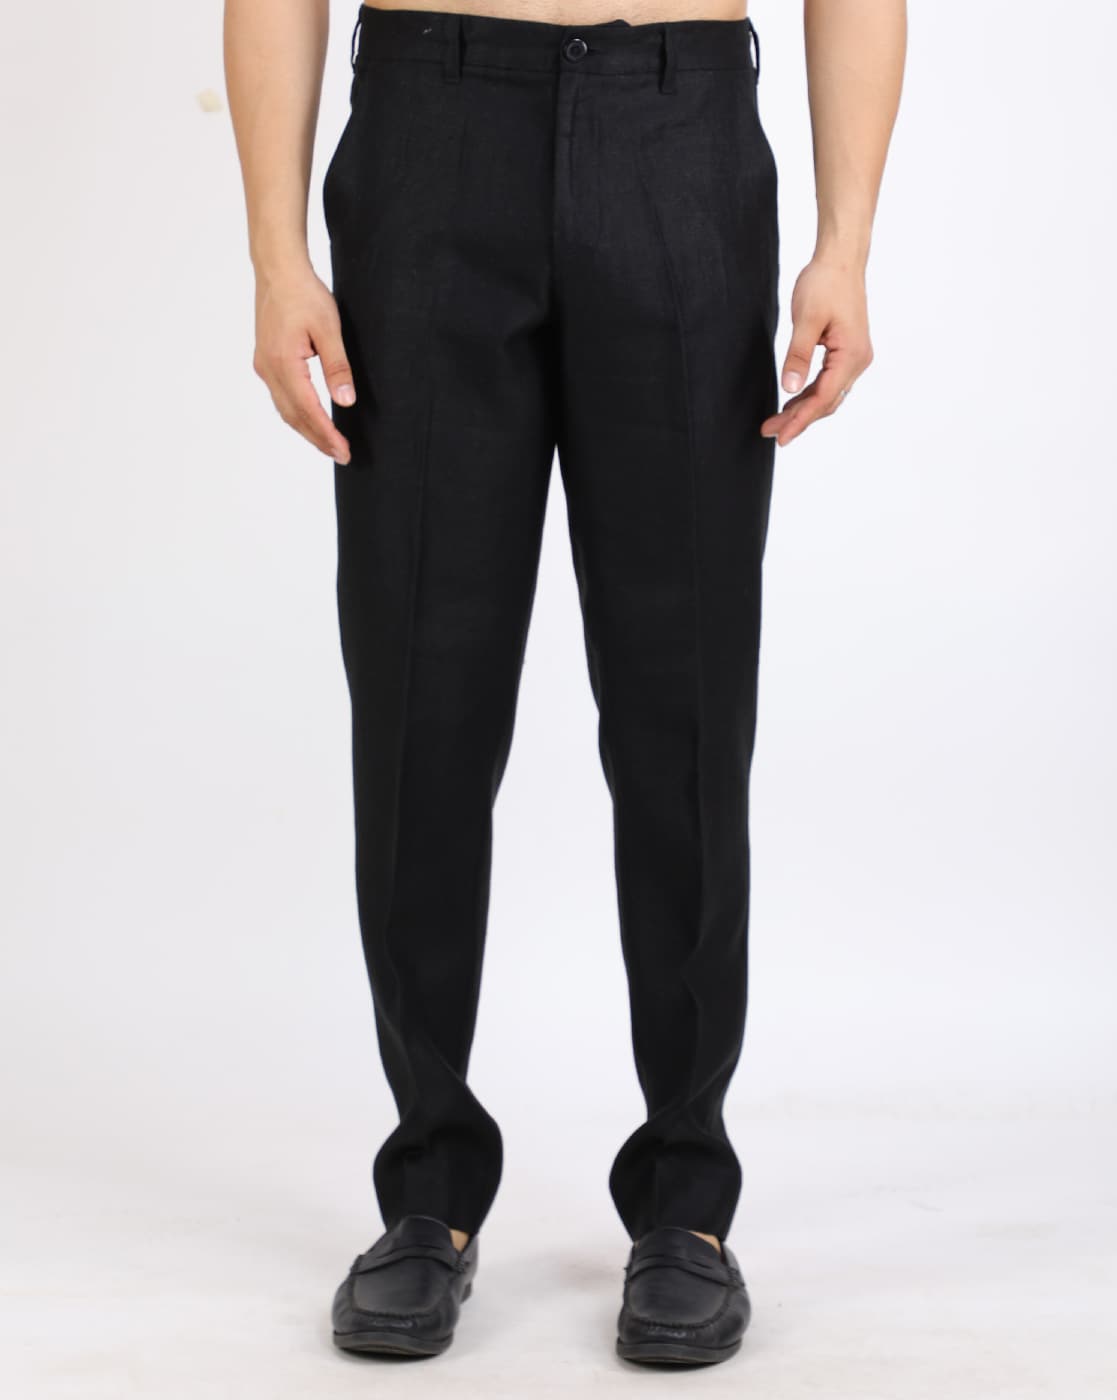 Buy Linen Bloom Flat Front Pant with Drawstring Waist  Black Color Men   AJIO LUXE